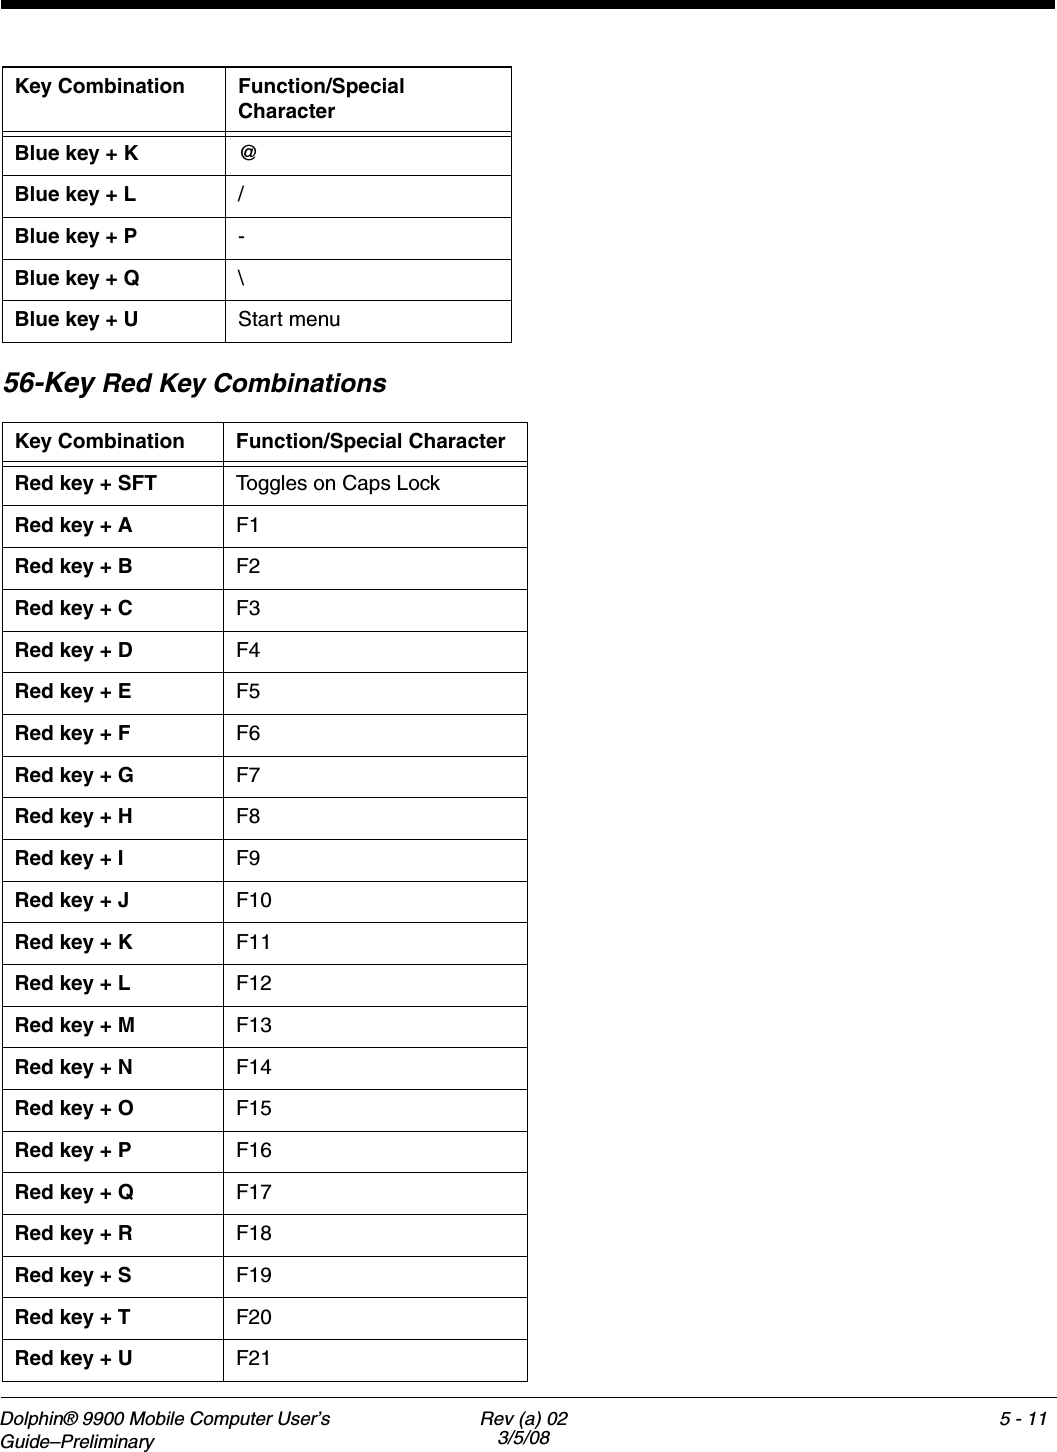 Dolphin® 9900 Mobile Computer User’s Guide–Preliminary Rev (a) 023/5/085 - 1156-Key Red Key Combinations Blue key + K @Blue key + L /Blue key + P -Blue key + Q \Blue key + U Start menuKey Combination Function/Special CharacterRed key + SFT Toggles on Caps LockRed key + A F1Red key + B F2Red key + C F3Red key + D F4Red key + E F5Red key + F F6Red key + G F7Red key + H F8Red key + I F9Red key + J F10Red key + K F11Red key + L F12Red key + M F13Red key + N F14Red key + O F15Red key + P F16Red key + Q F17Red key + R F18Red key + S F19Red key + T F20Red key + U F21Key Combination Function/Special Character